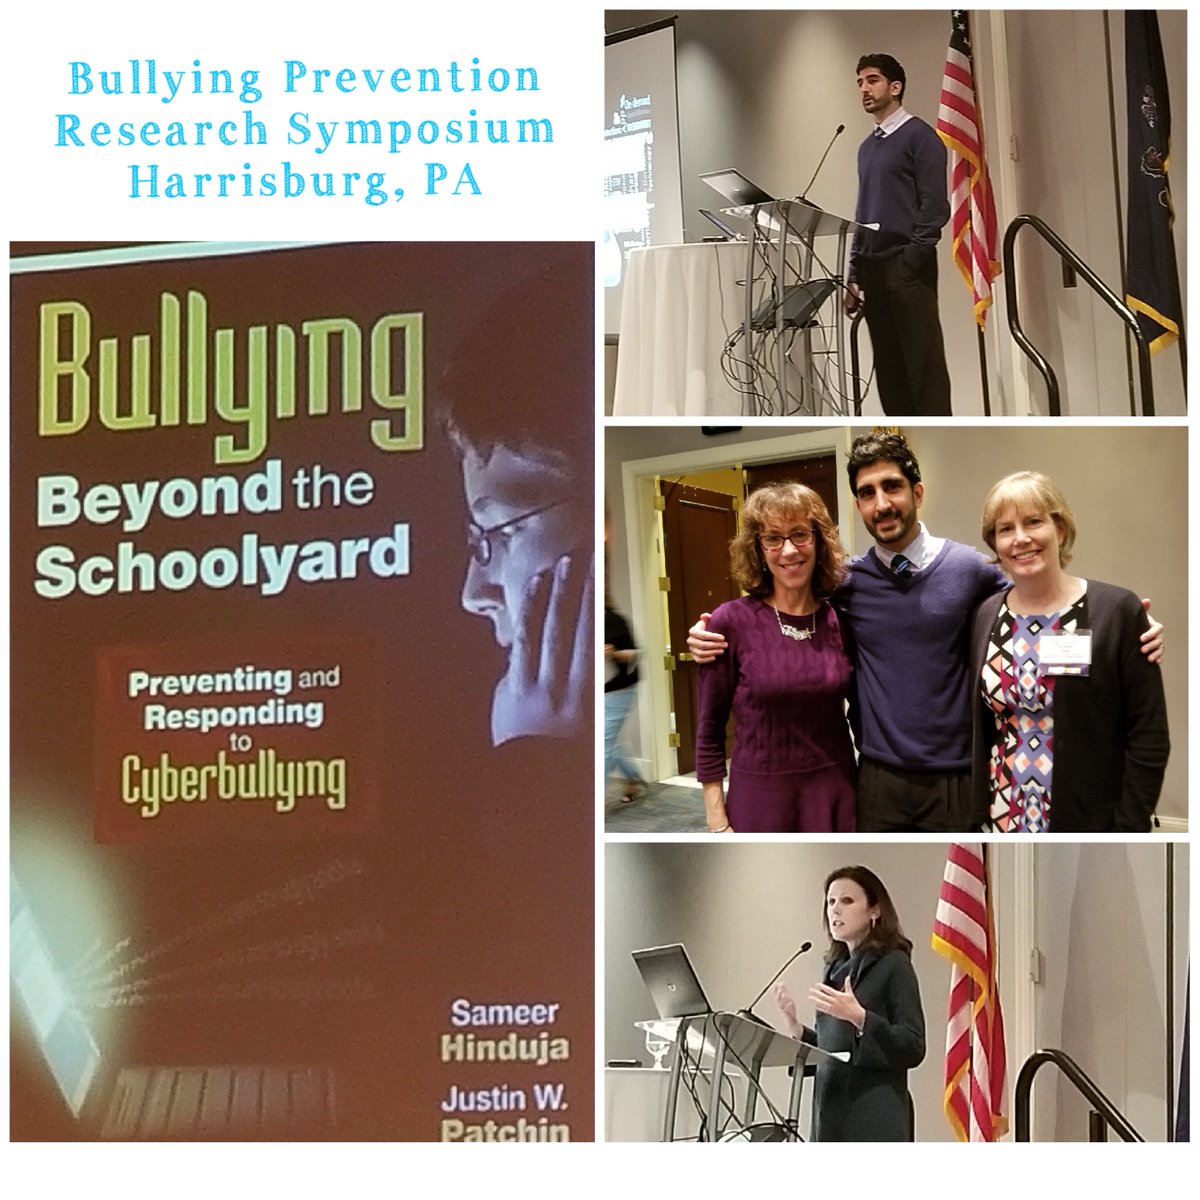 Jane Riese, OBPP Associate Director, and Dr. Sue Limber, Clemson University,  are presenting today at the Bullying Prevention Research Symposium in Harrisburg, PA.  @Olweus #OlweusCU #BullyingPrevention
Top photo:  @hinduja  bottom photo:  Dr. Catherine Bradshaw.